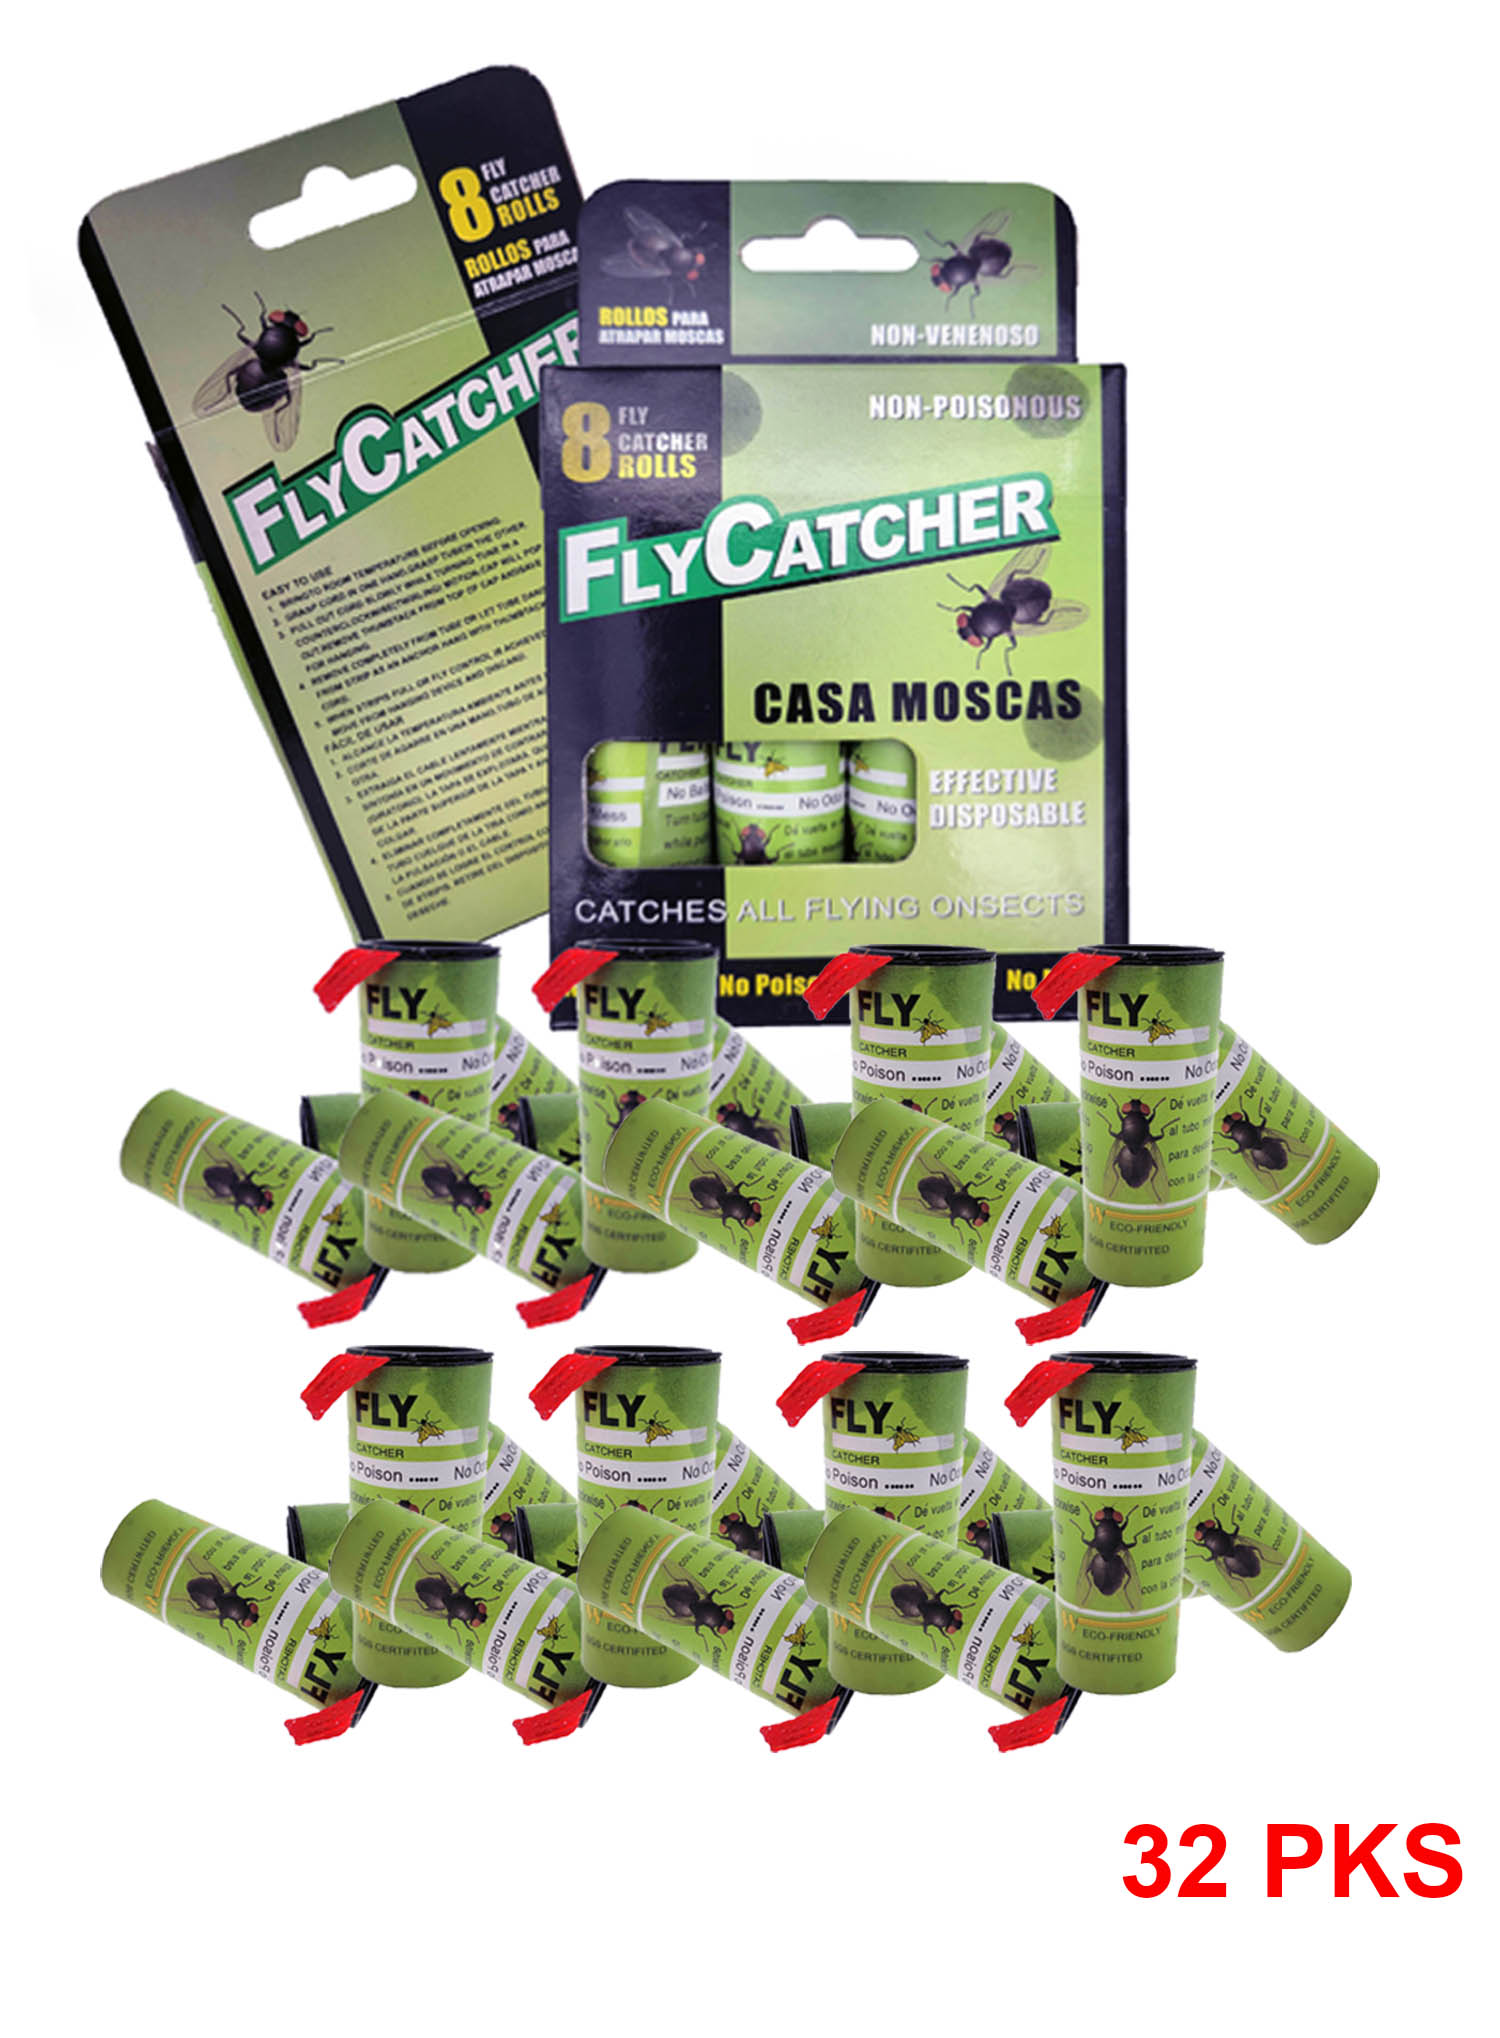 The Buzz Fly Catcher Trap For outdoor use BOTTLES OR REFILLS attracts flies up 